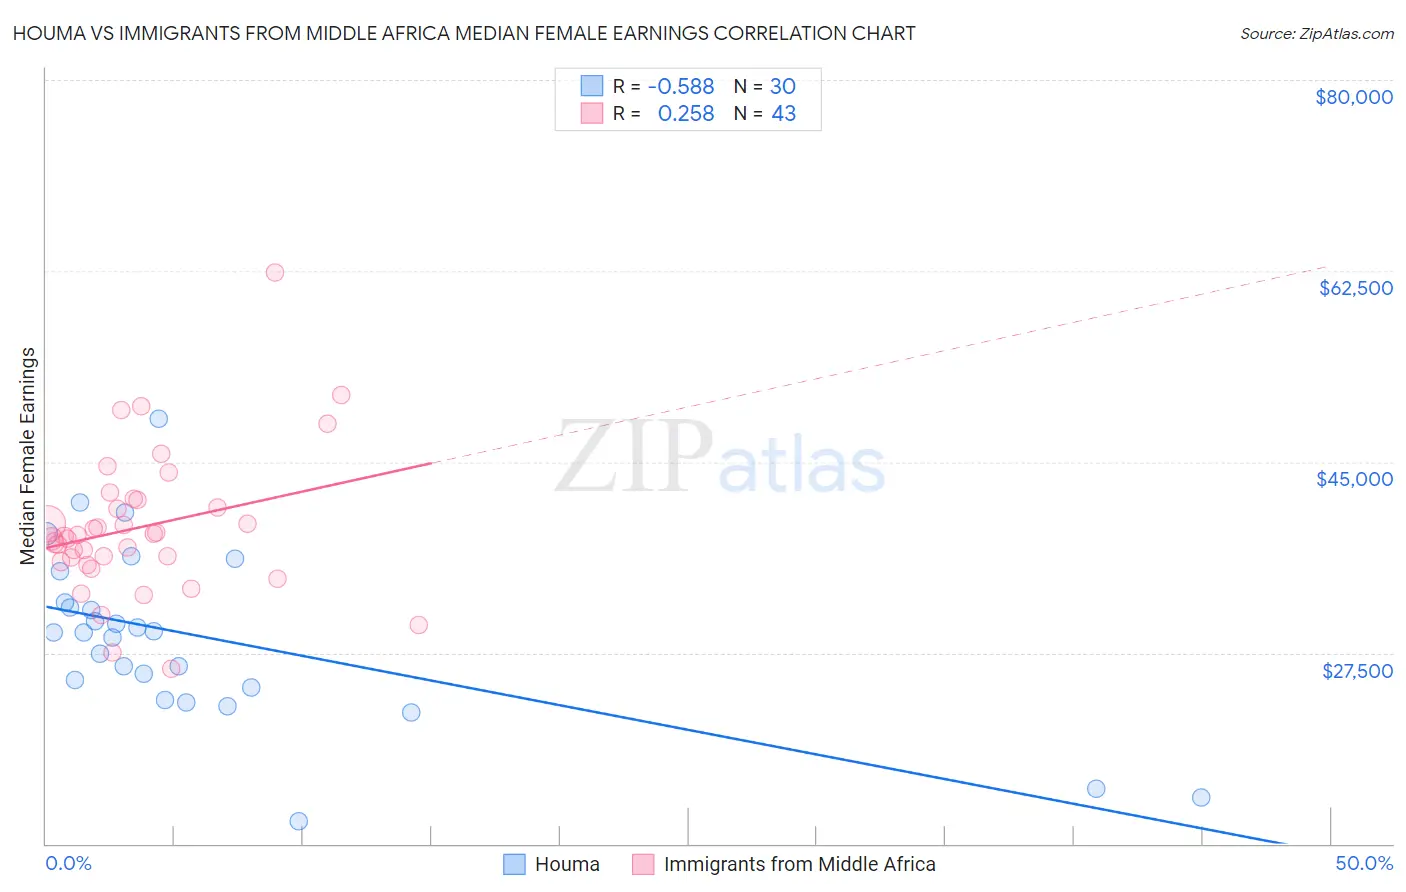 Houma vs Immigrants from Middle Africa Median Female Earnings